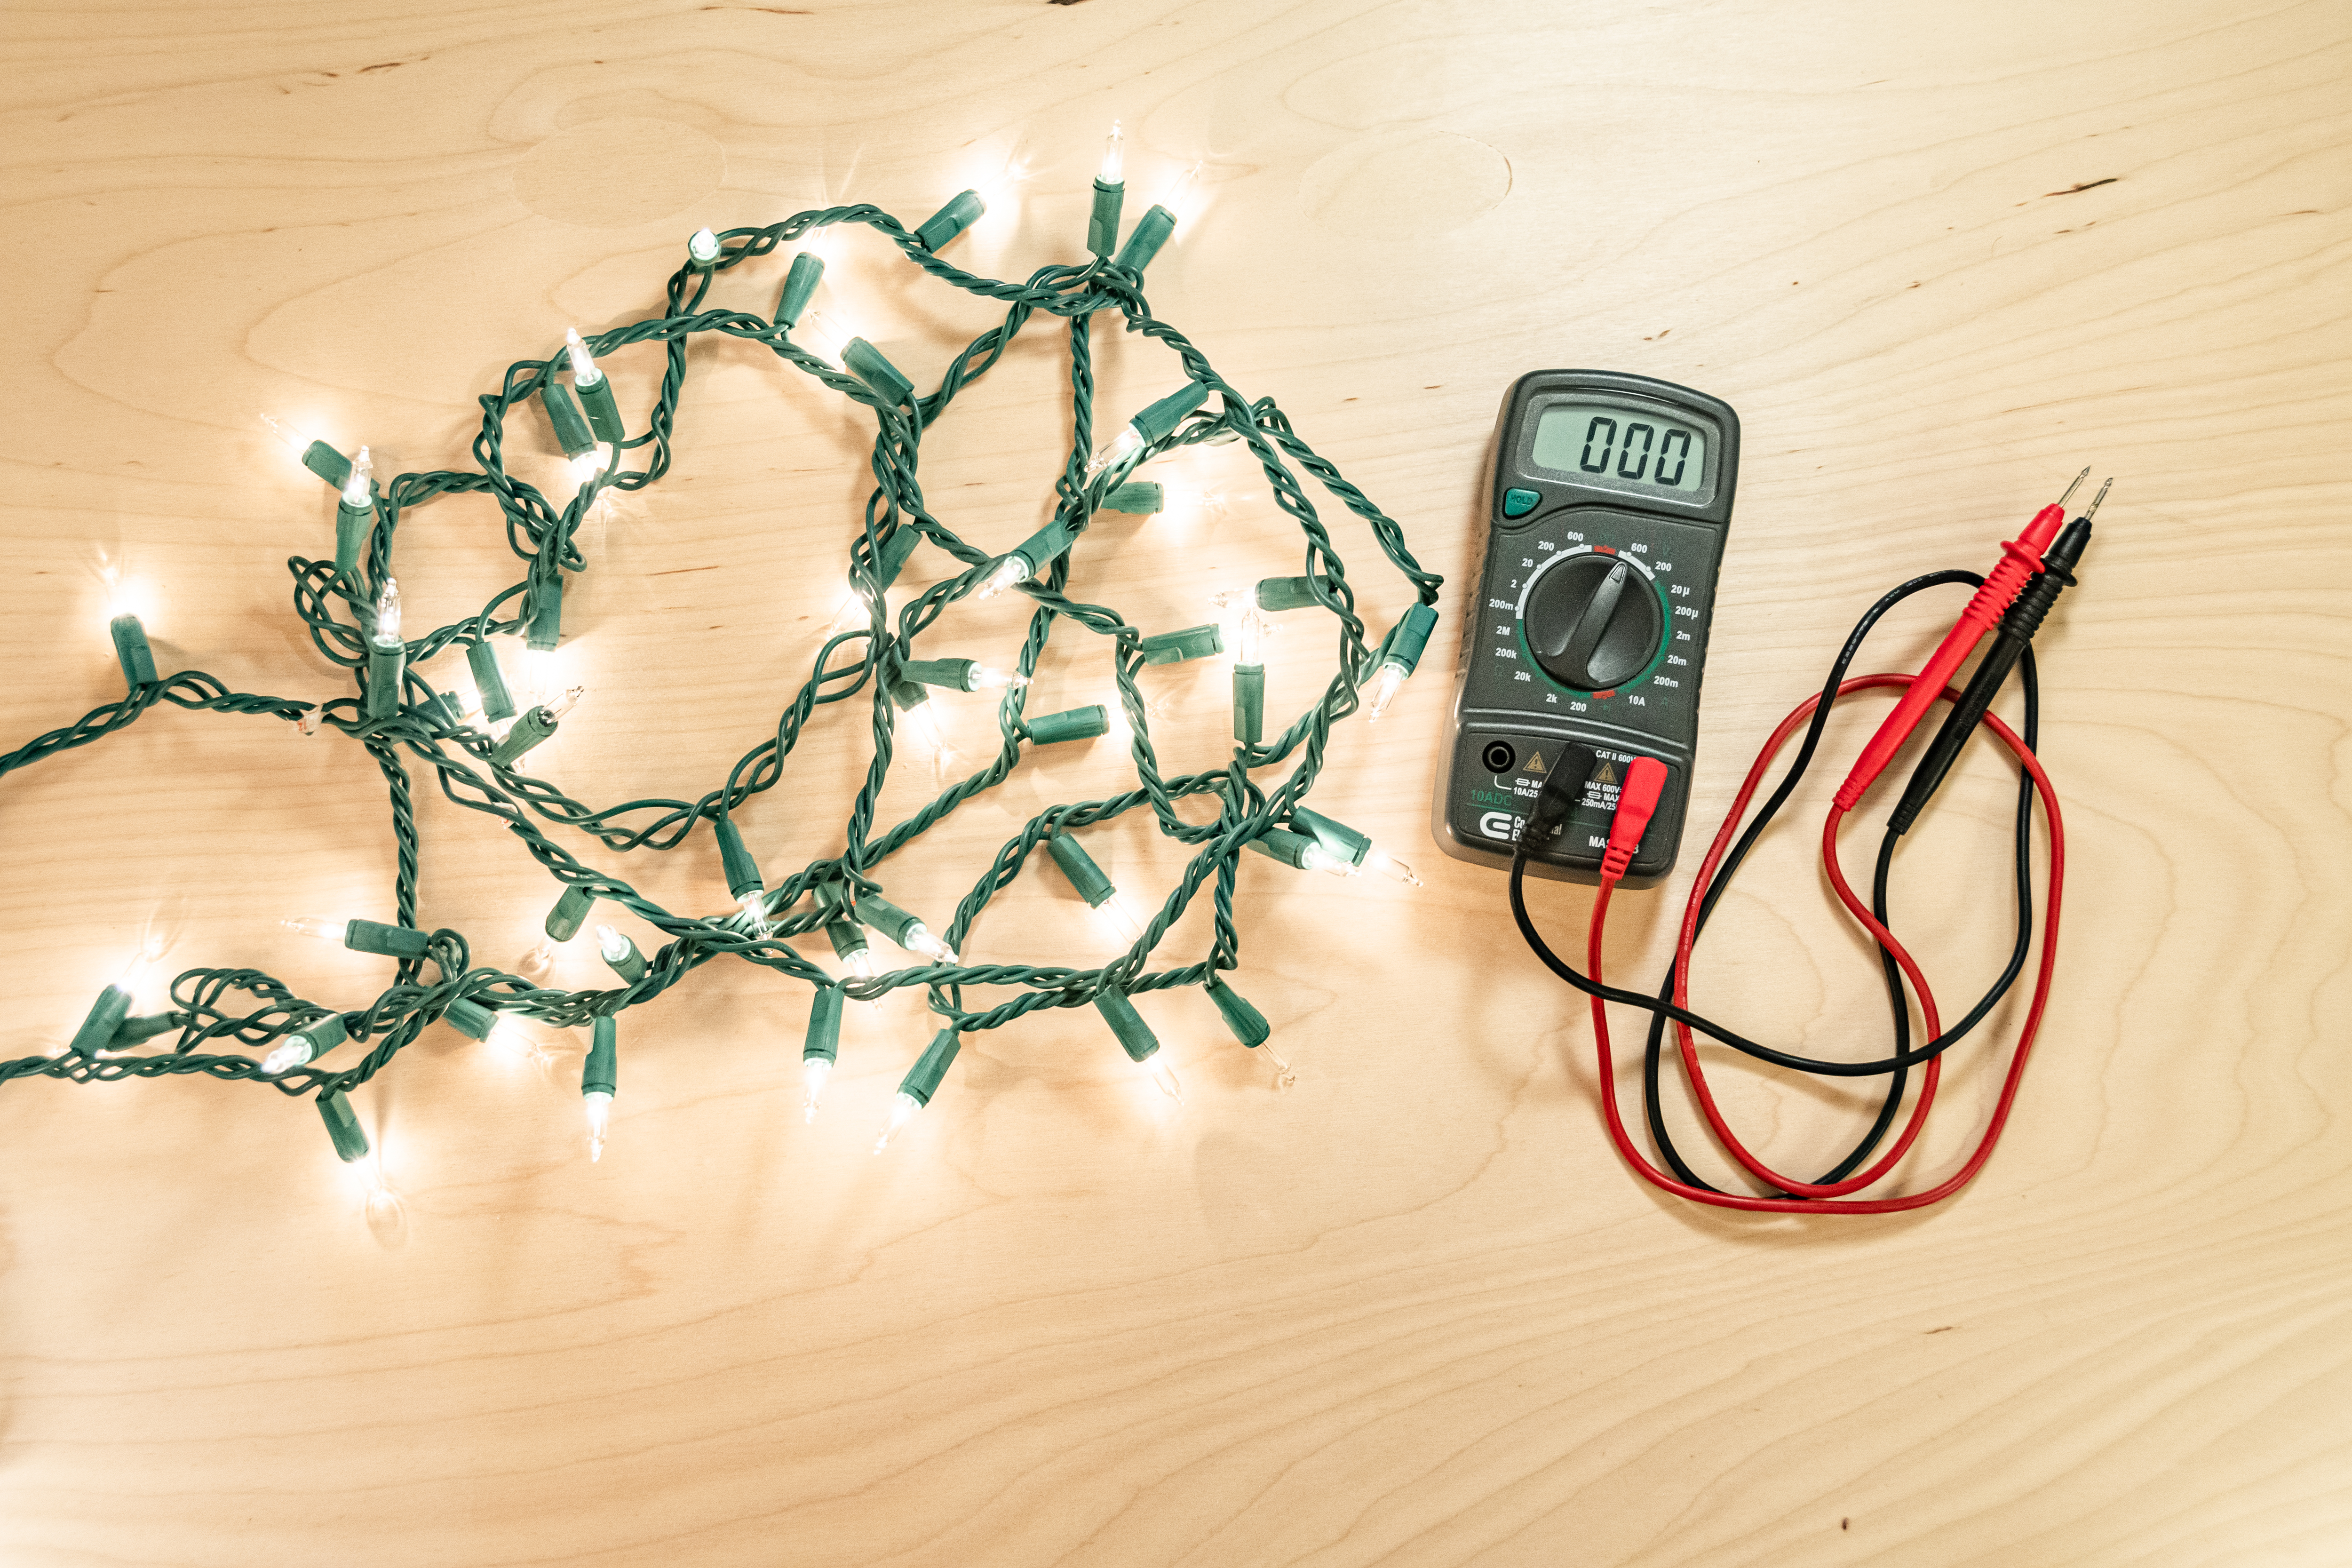 What the Tech: How to find a bad bulb on Christmas lights